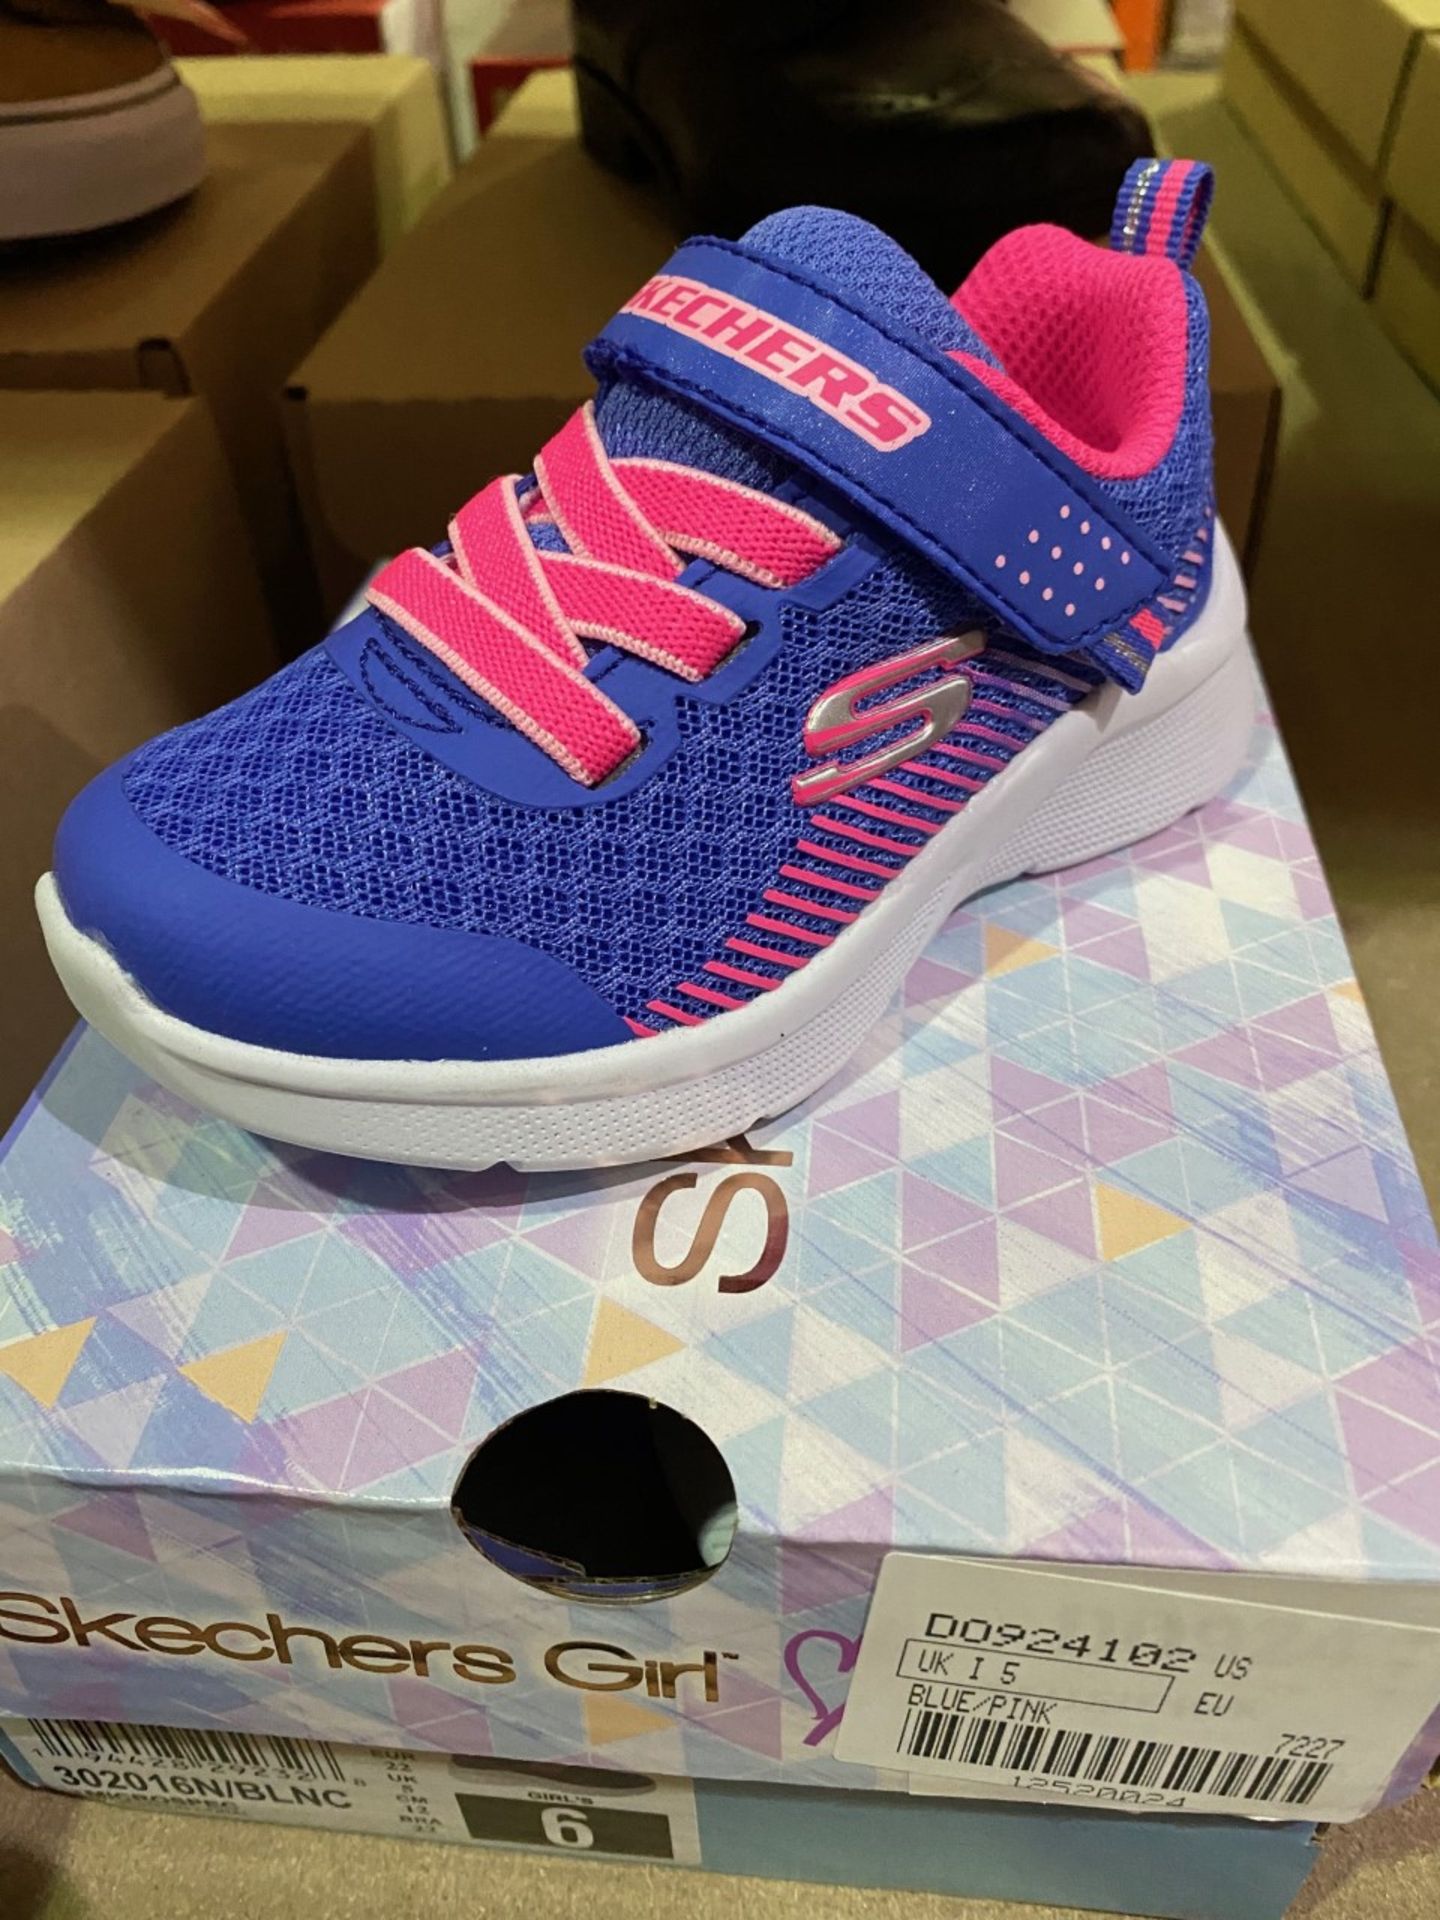 NEW & BOXED SKETCHERS BLUE/PINK TRAINER SIZE INFANT 5